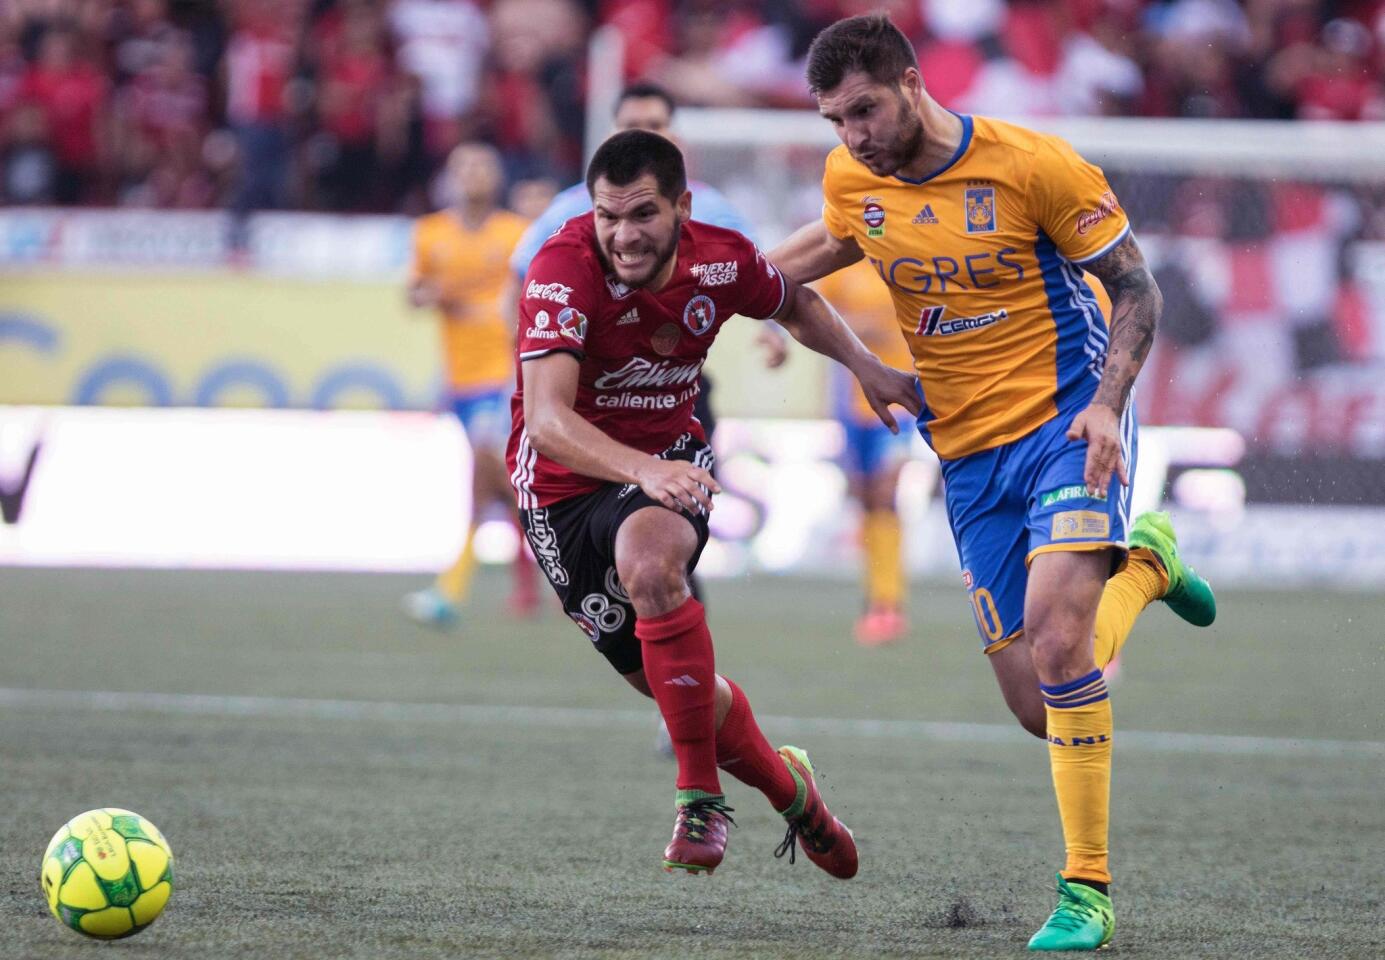 Monterrey`s Tigres Andre-Pierre Gignac (R) vies for the ball with Tijuana`s Hiram Munoz (L) during their Mexican Clausura 2017 Tournament second leg semifinal match at the Caliente Stadium in Tijuana, Mexico on May 21, 2017. / AFP PHOTO / GUILLERMO ARIASGUILLERMO ARIAS/AFP/Getty Images ** OUTS - ELSENT, FPG, CM - OUTS * NM, PH, VA if sourced by CT, LA or MoD **